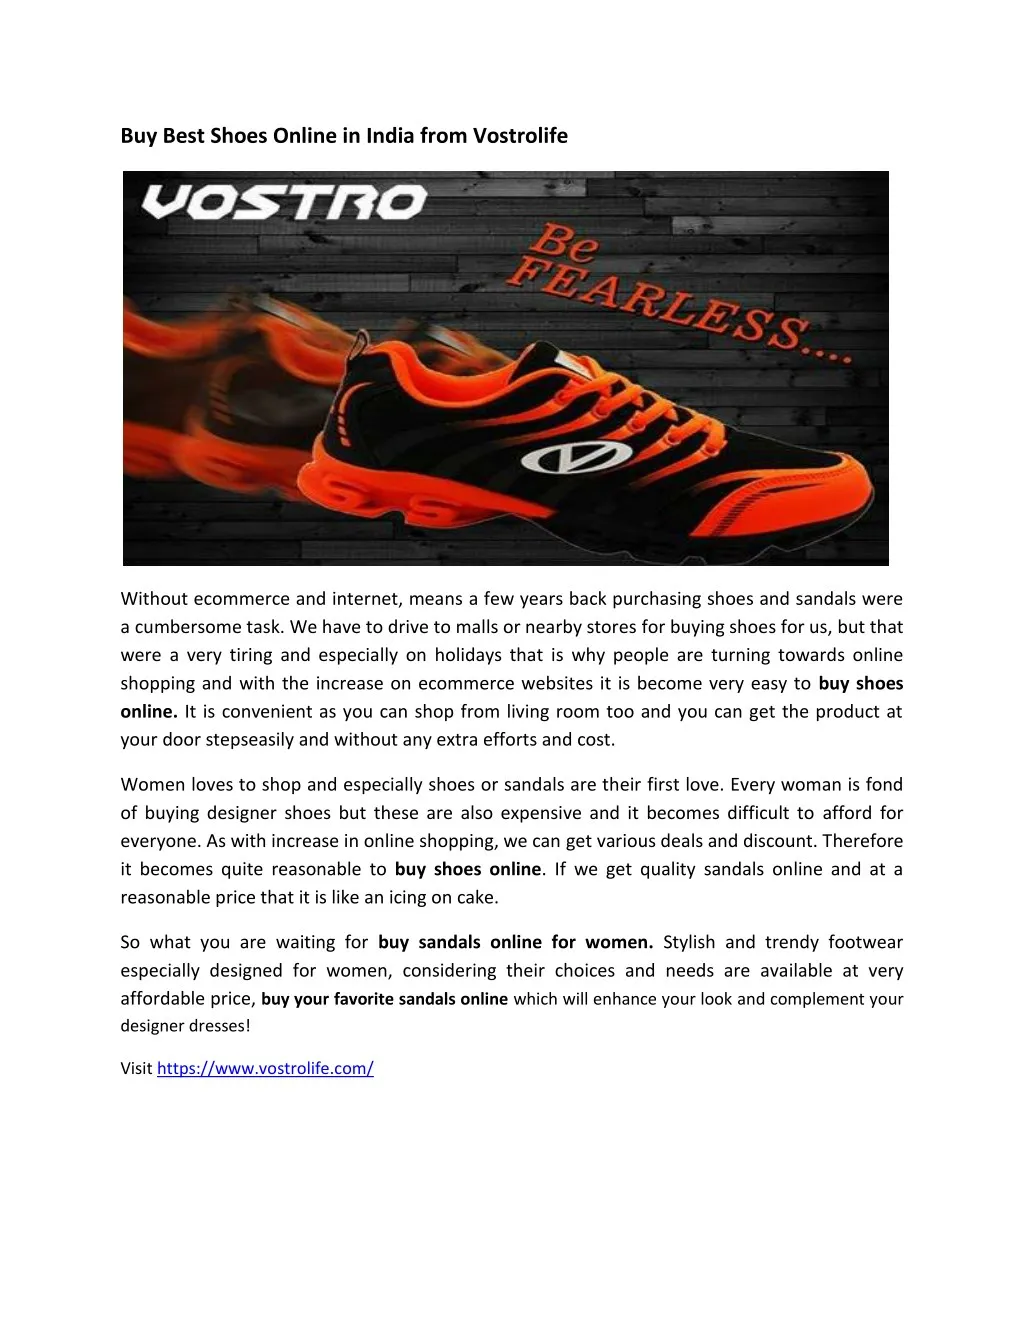 buy best shoes online in india from vostrolife